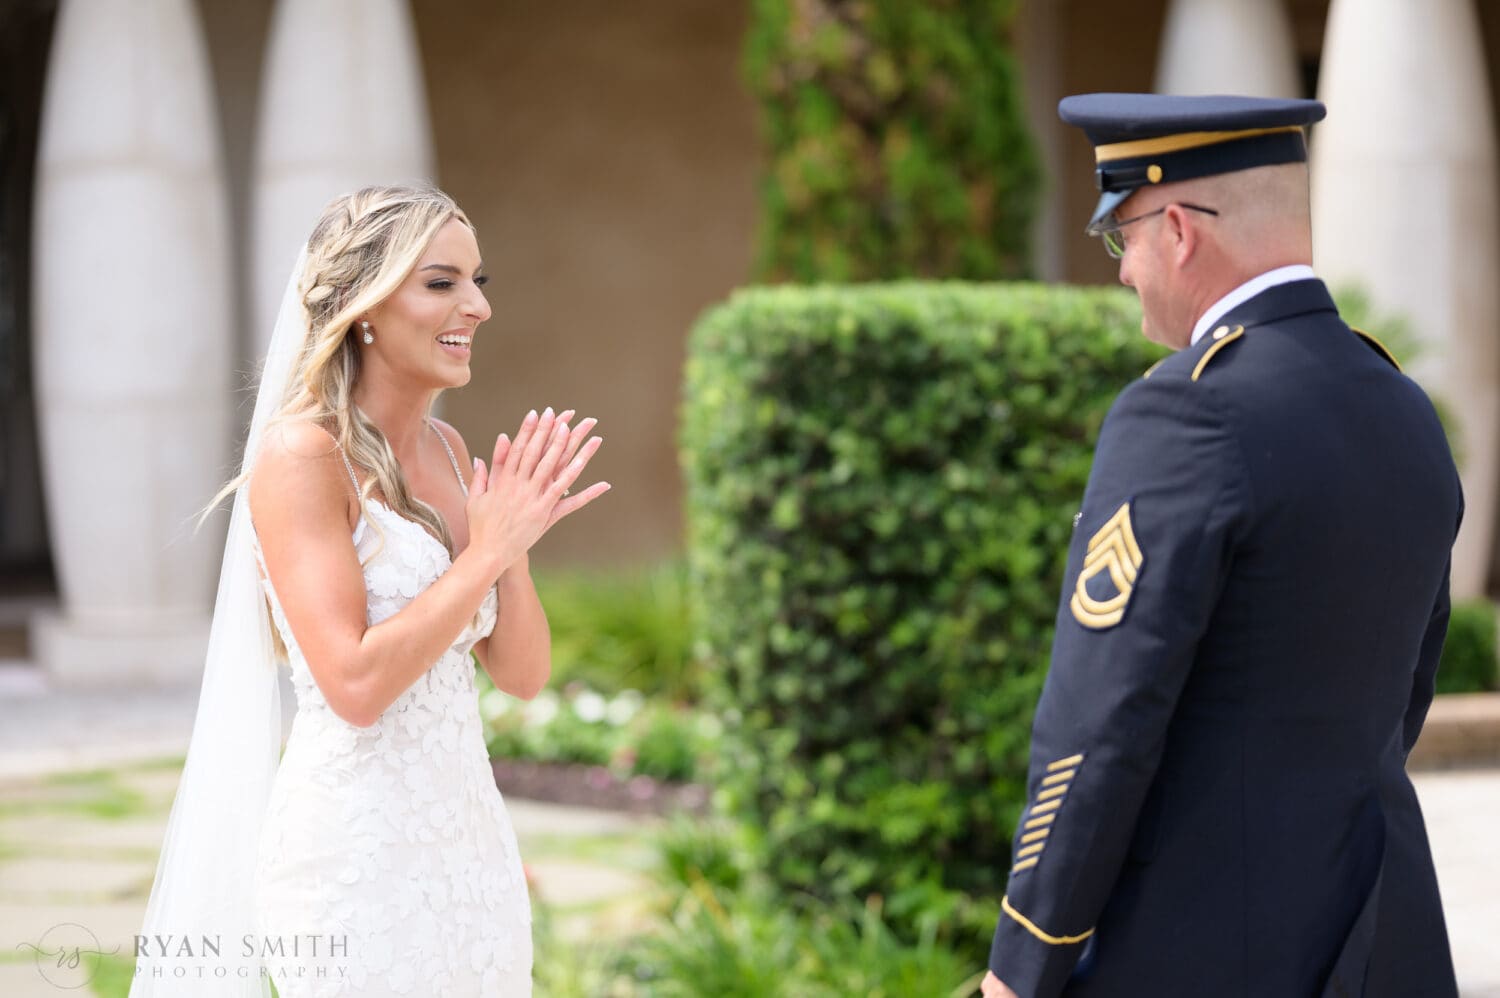 Emotional first look with bride and father in military dress uniform - 21 Main Events